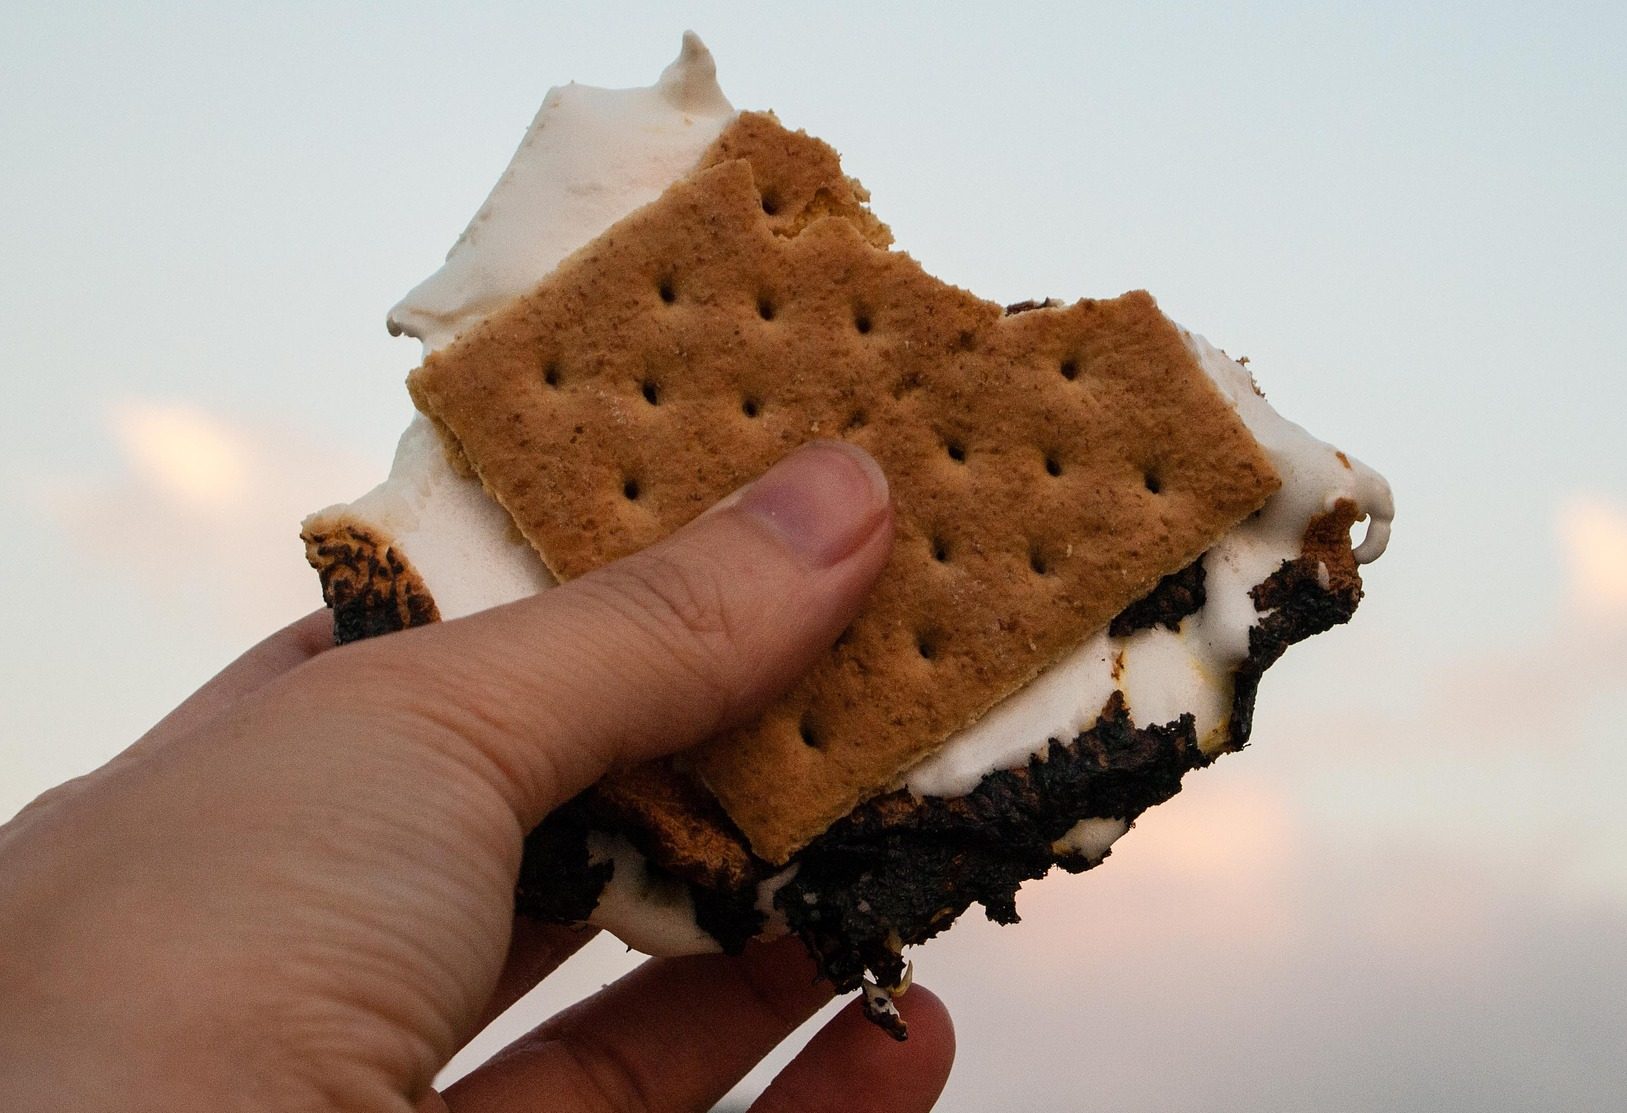 S'mores ricetta microonde